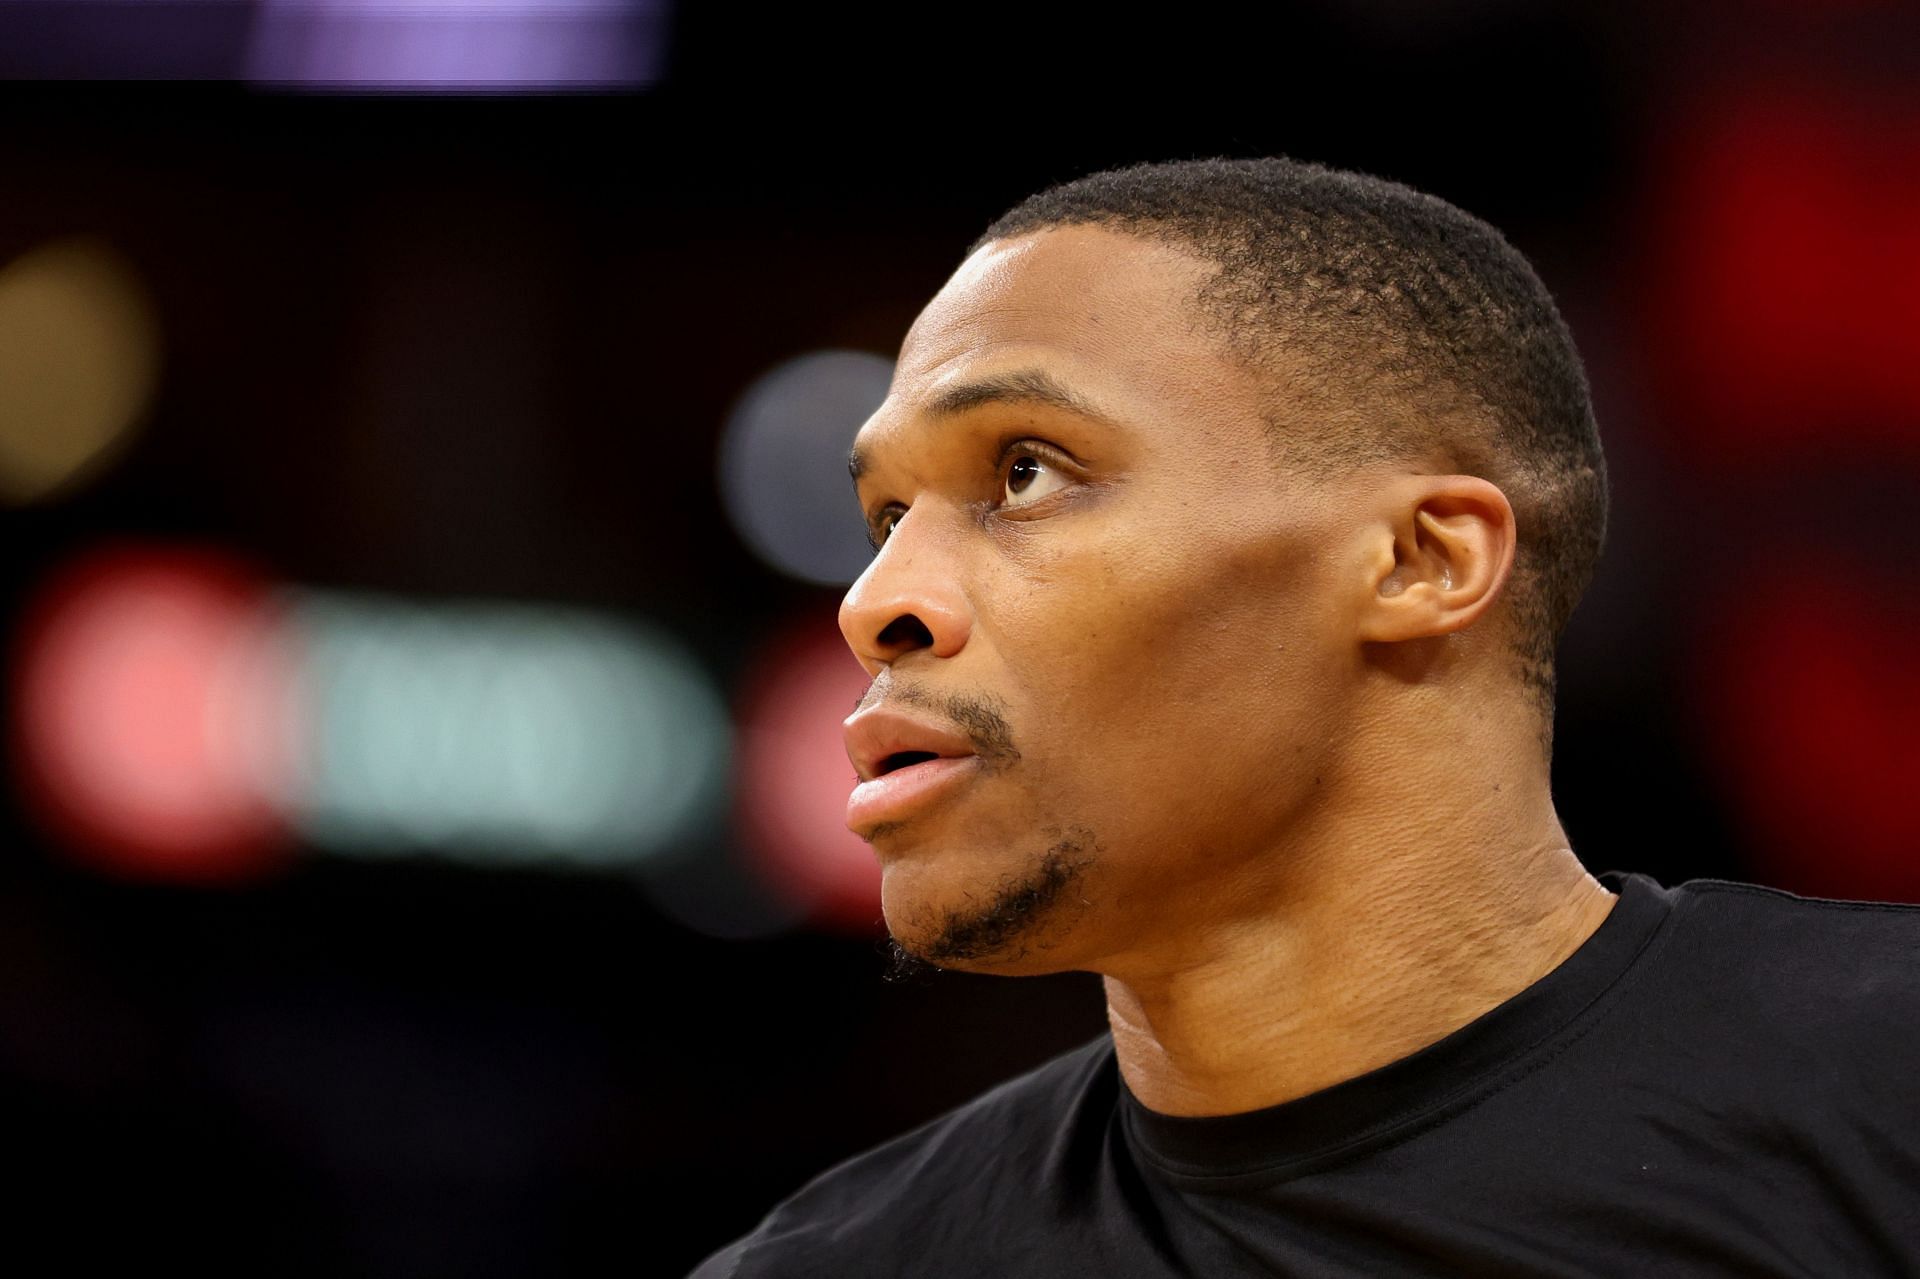 Russell Westbrook of the LA Lakers before facing the Houston Rockets on Dec. 28 in Houston, Texas.